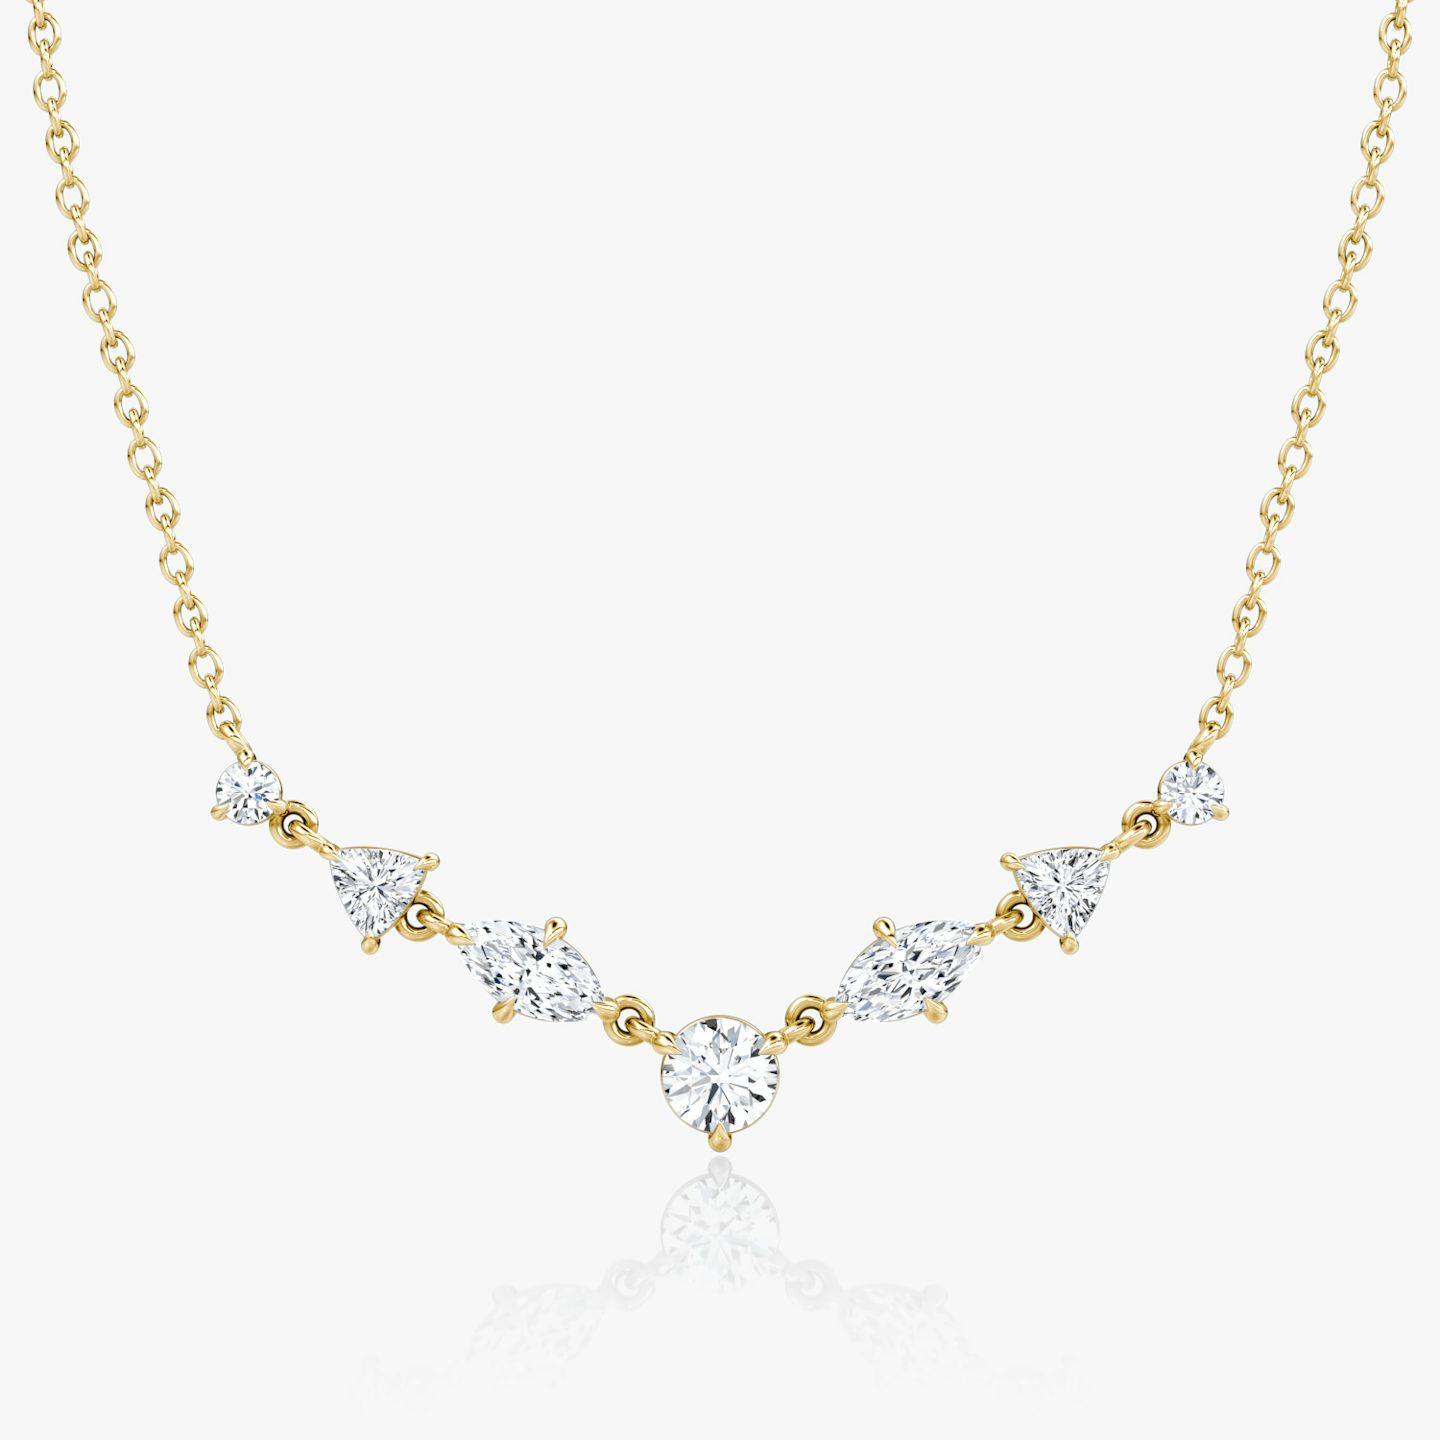 undefined | 14k | Yellow Gold | diamondtype: round-brilliant+marquise+trillion | chainLength: 16-18